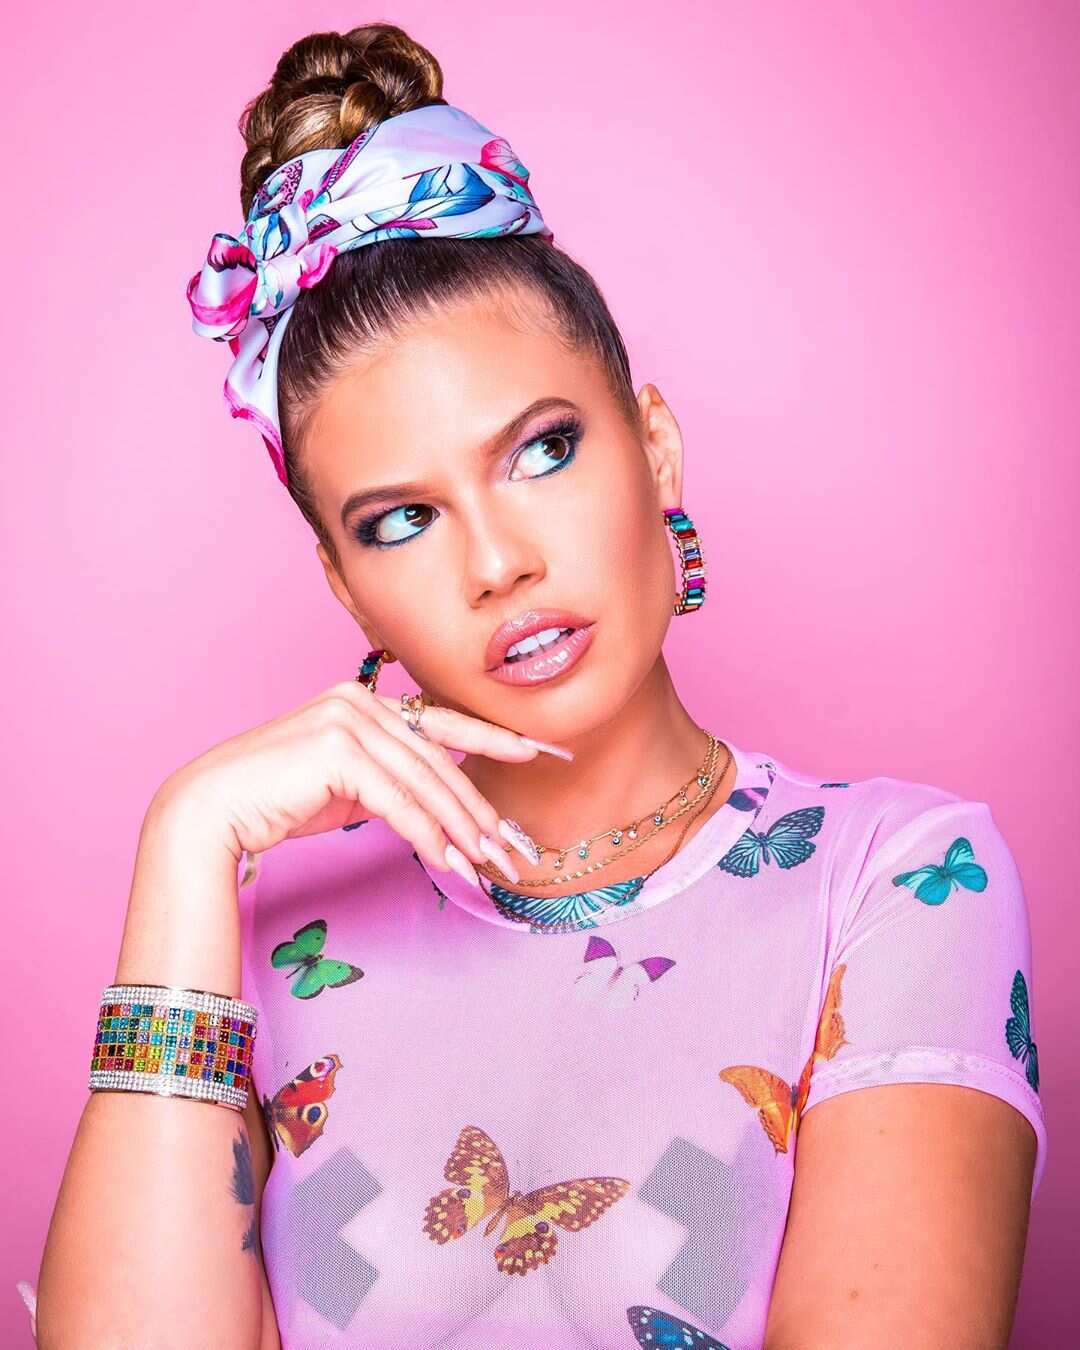 Chanel West Coast bio: real name, songs, age, net worth, laugh, parents -  